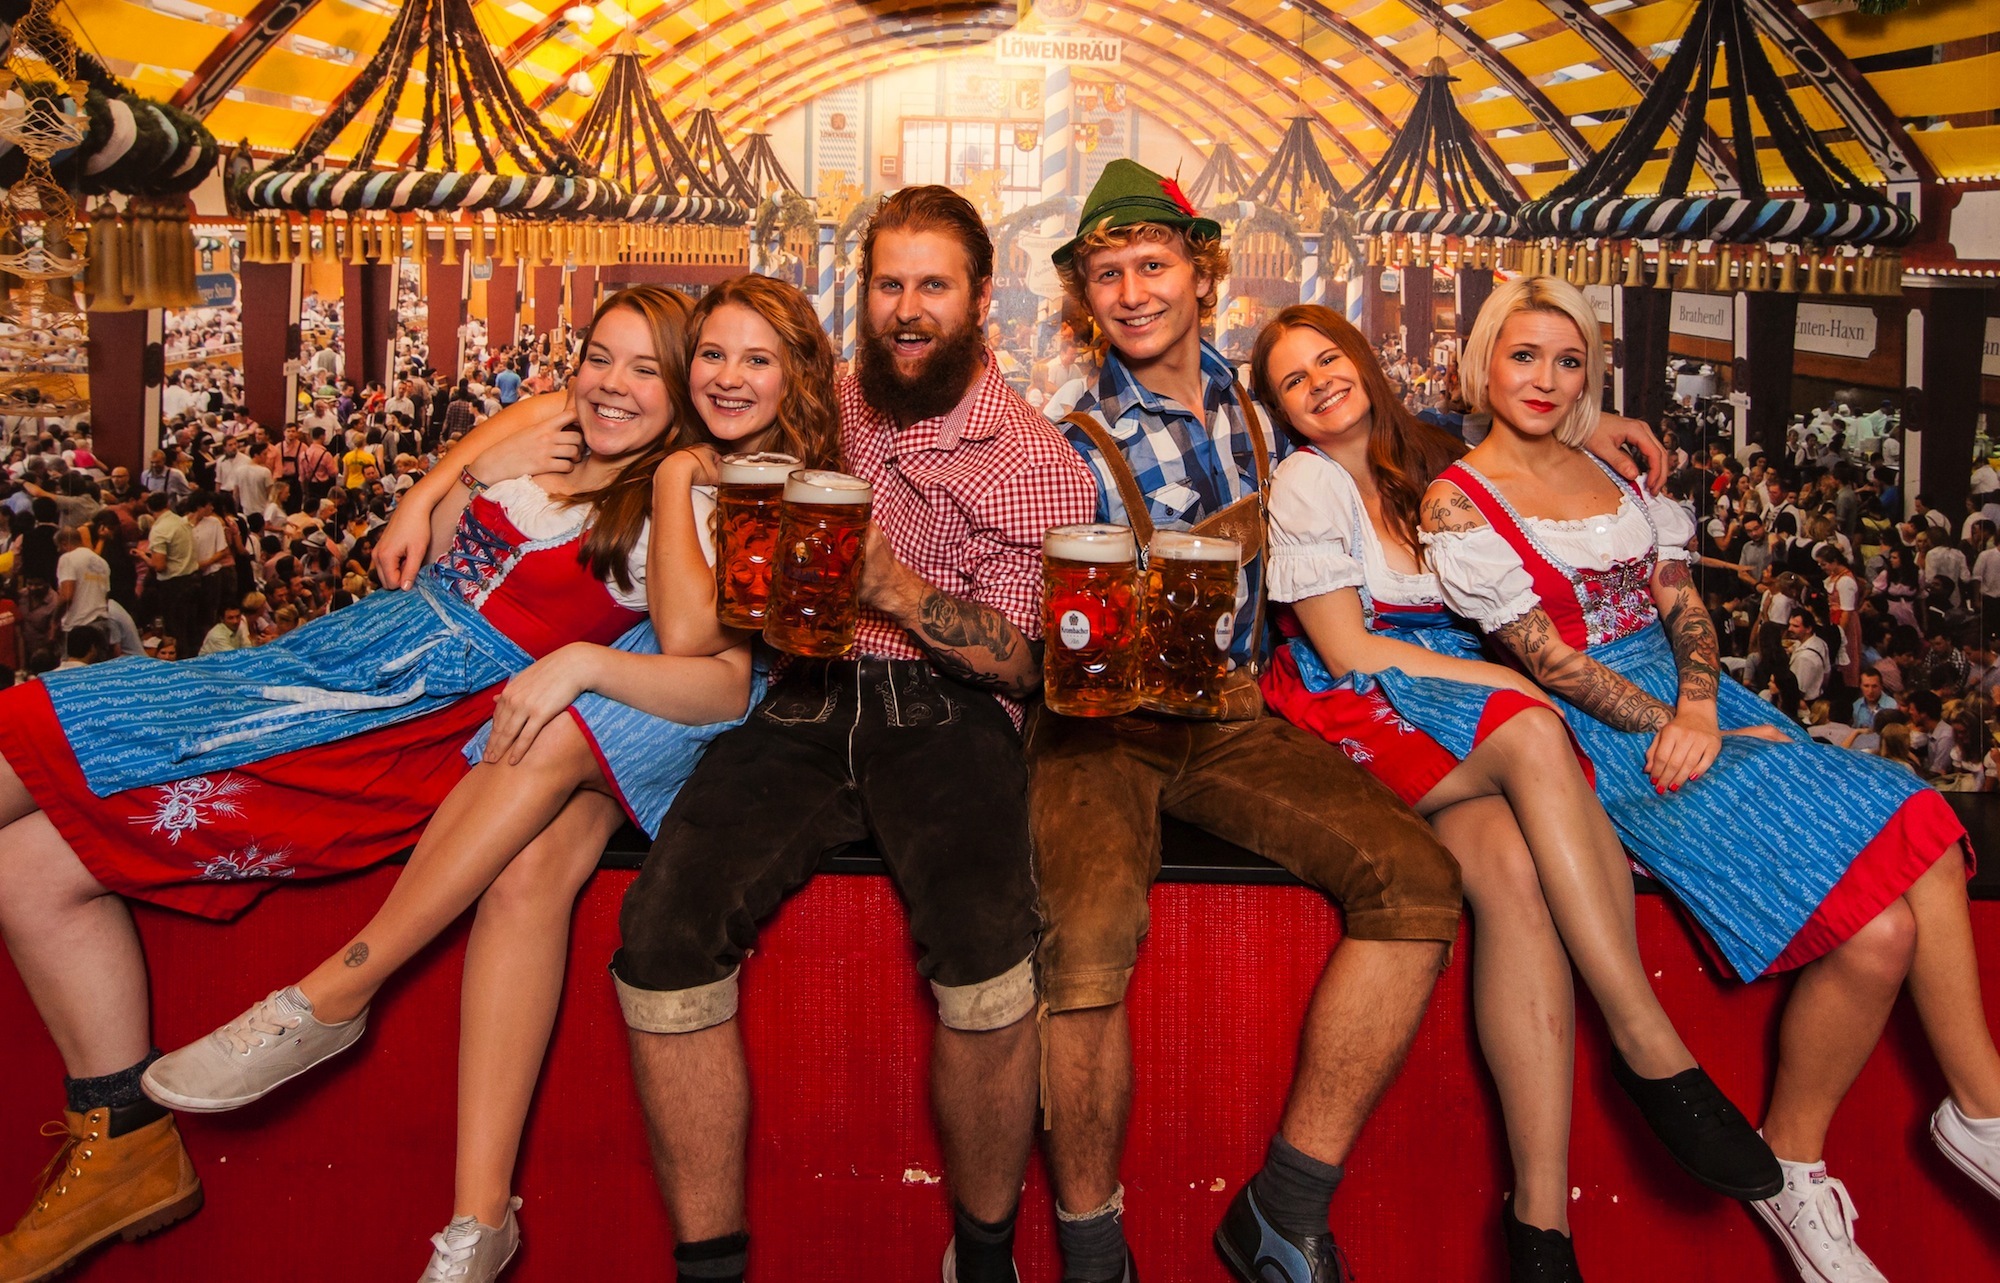 Oktoberfest at the Bavarian Beerhouse Things to do in London